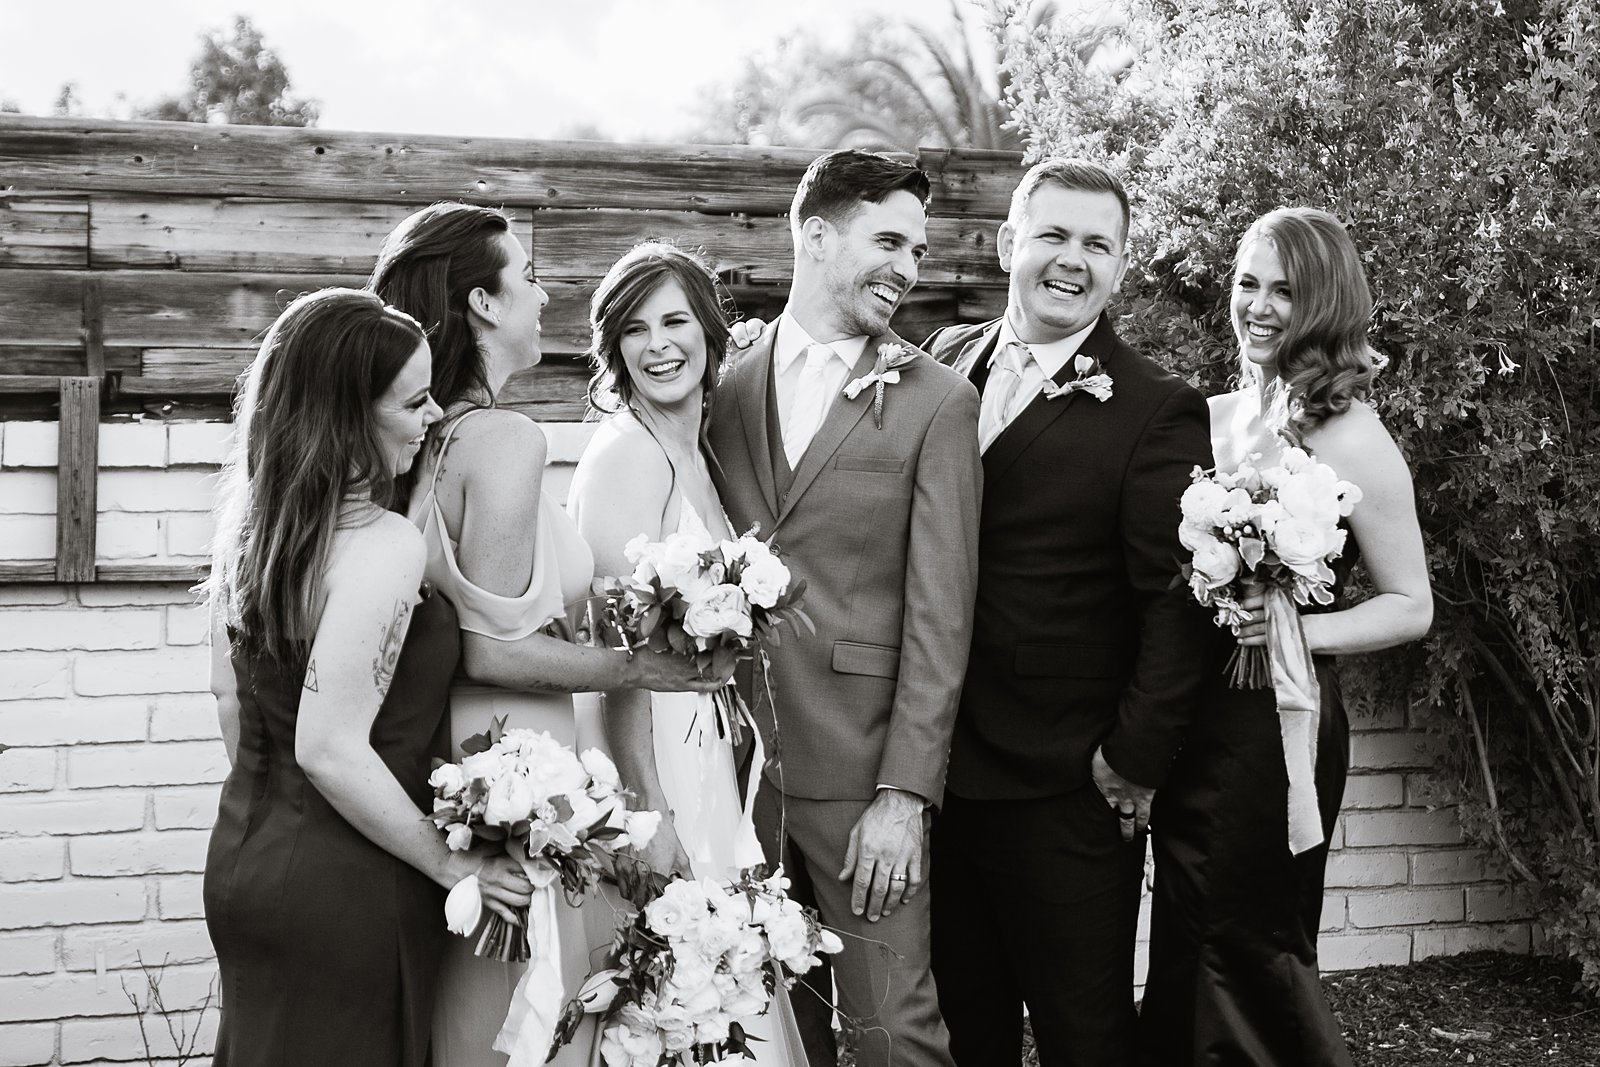 Bridal party laughing together at Gather Estate wedding by Phoenix wedding photographer PMA Photography.